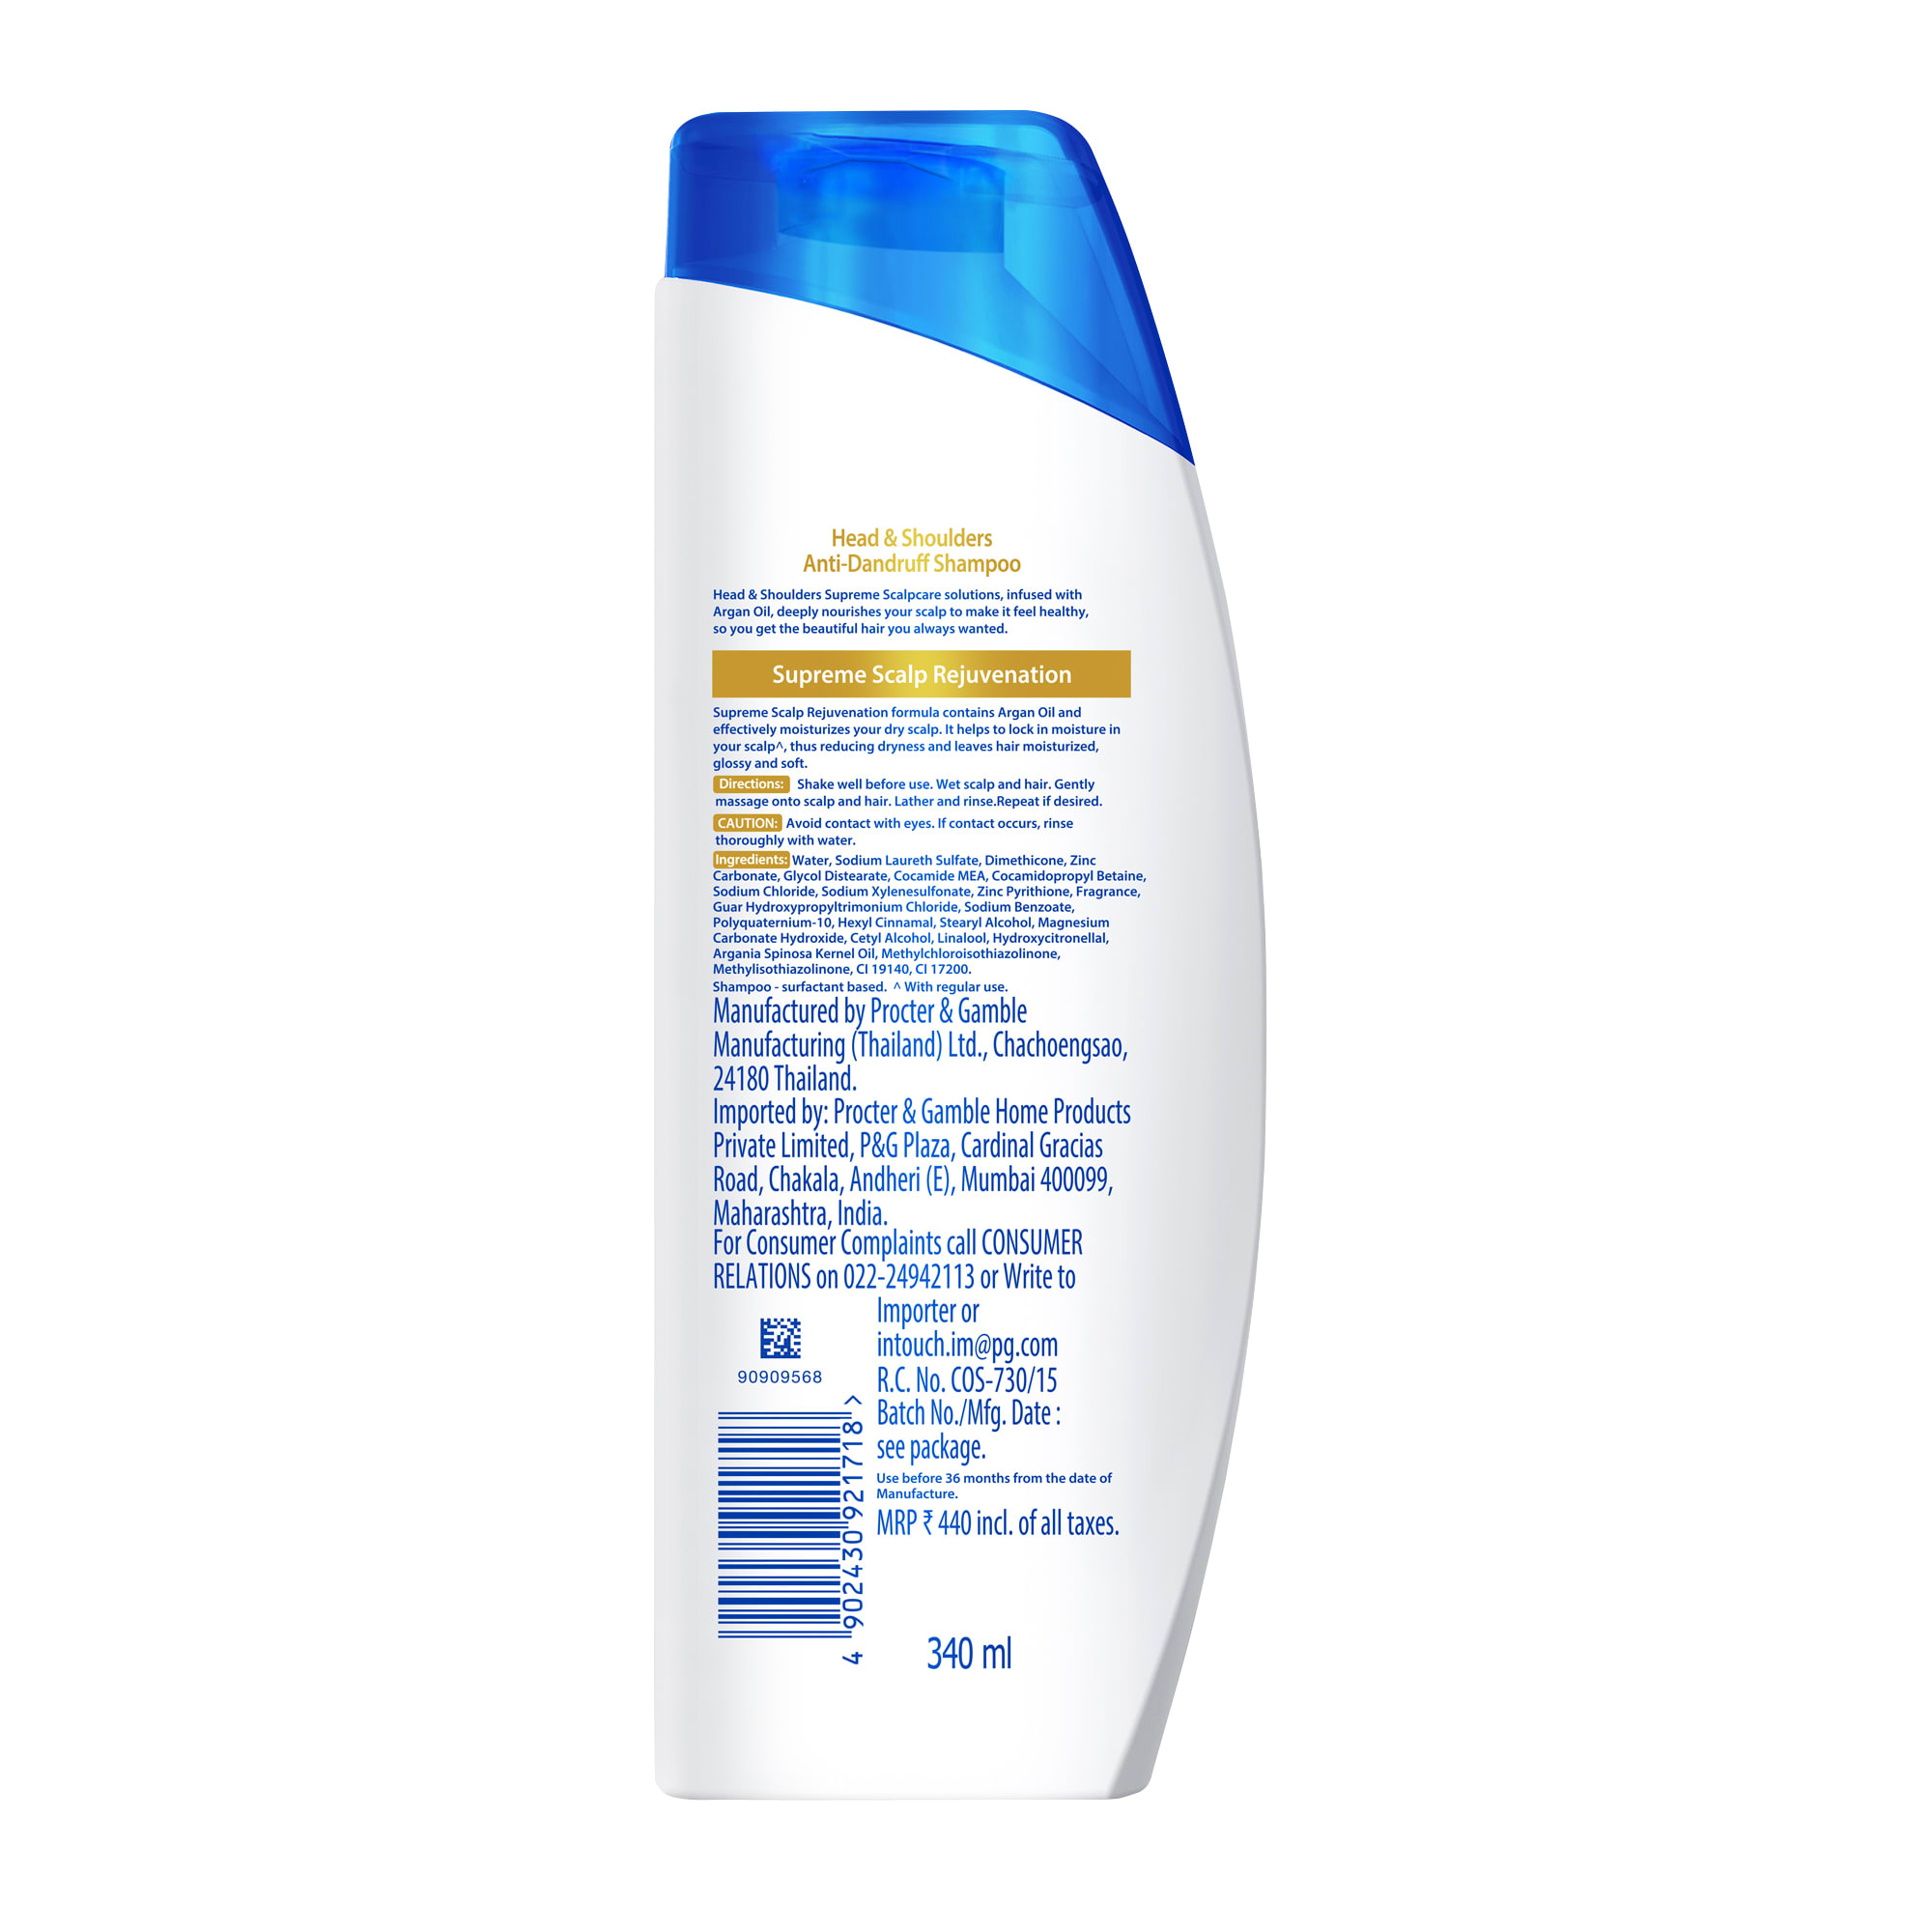 Head  Shoulders 2 in 1 AntiDandruff ShampooConditioner Cool Menthol Buy  bottle of 340 ml Shampoo at best price in India  1mg